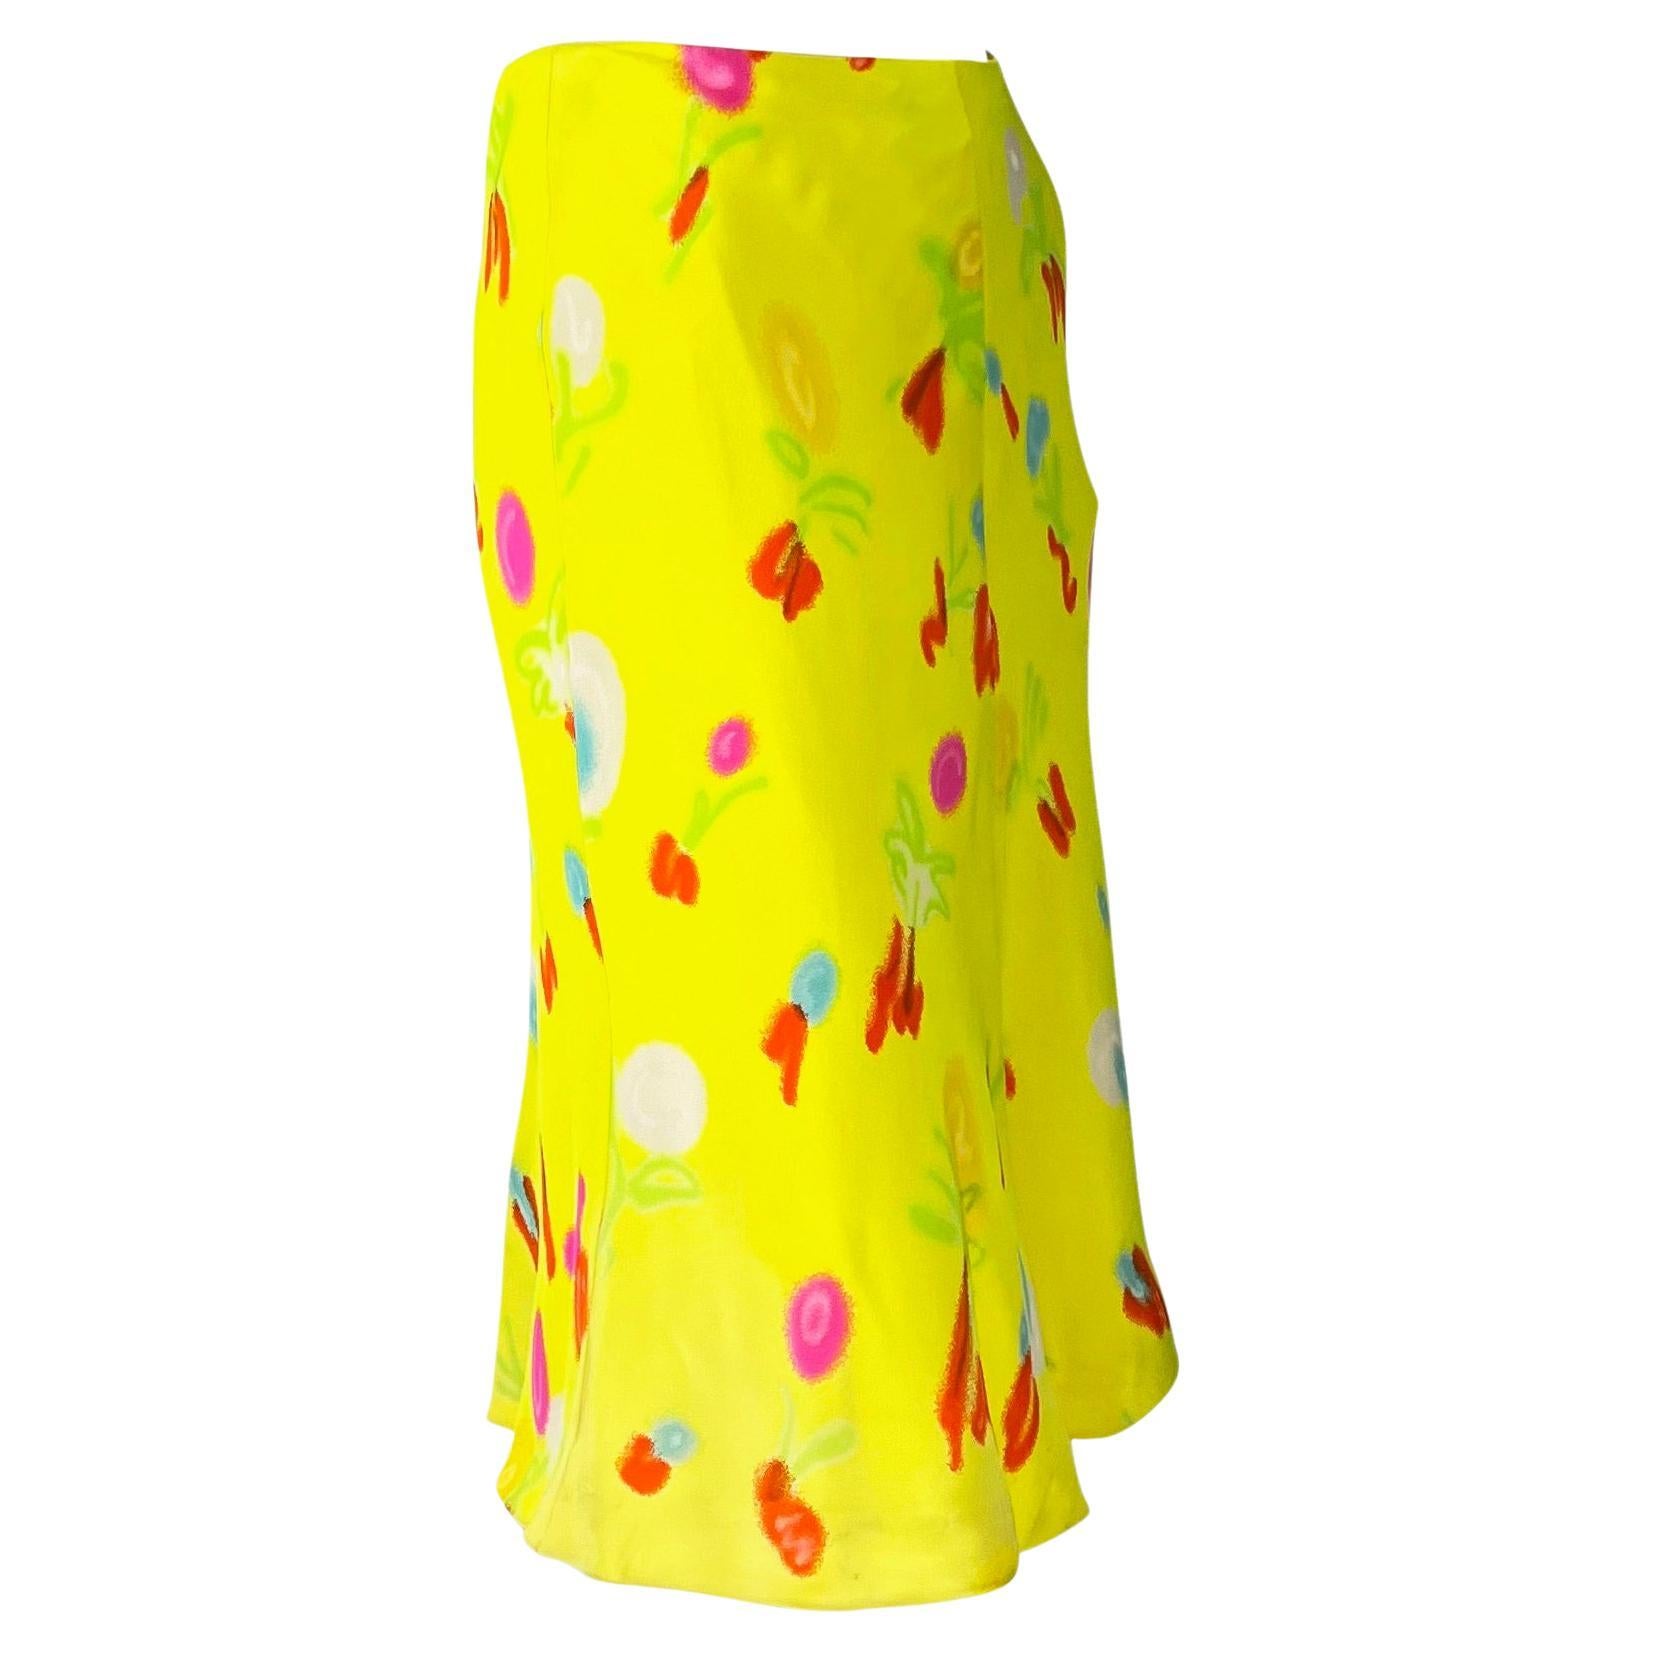 NWT S/S 1996 Gianni Versace Couture Neon Yellow Graffiti Floral Print Skirt For Sale 3